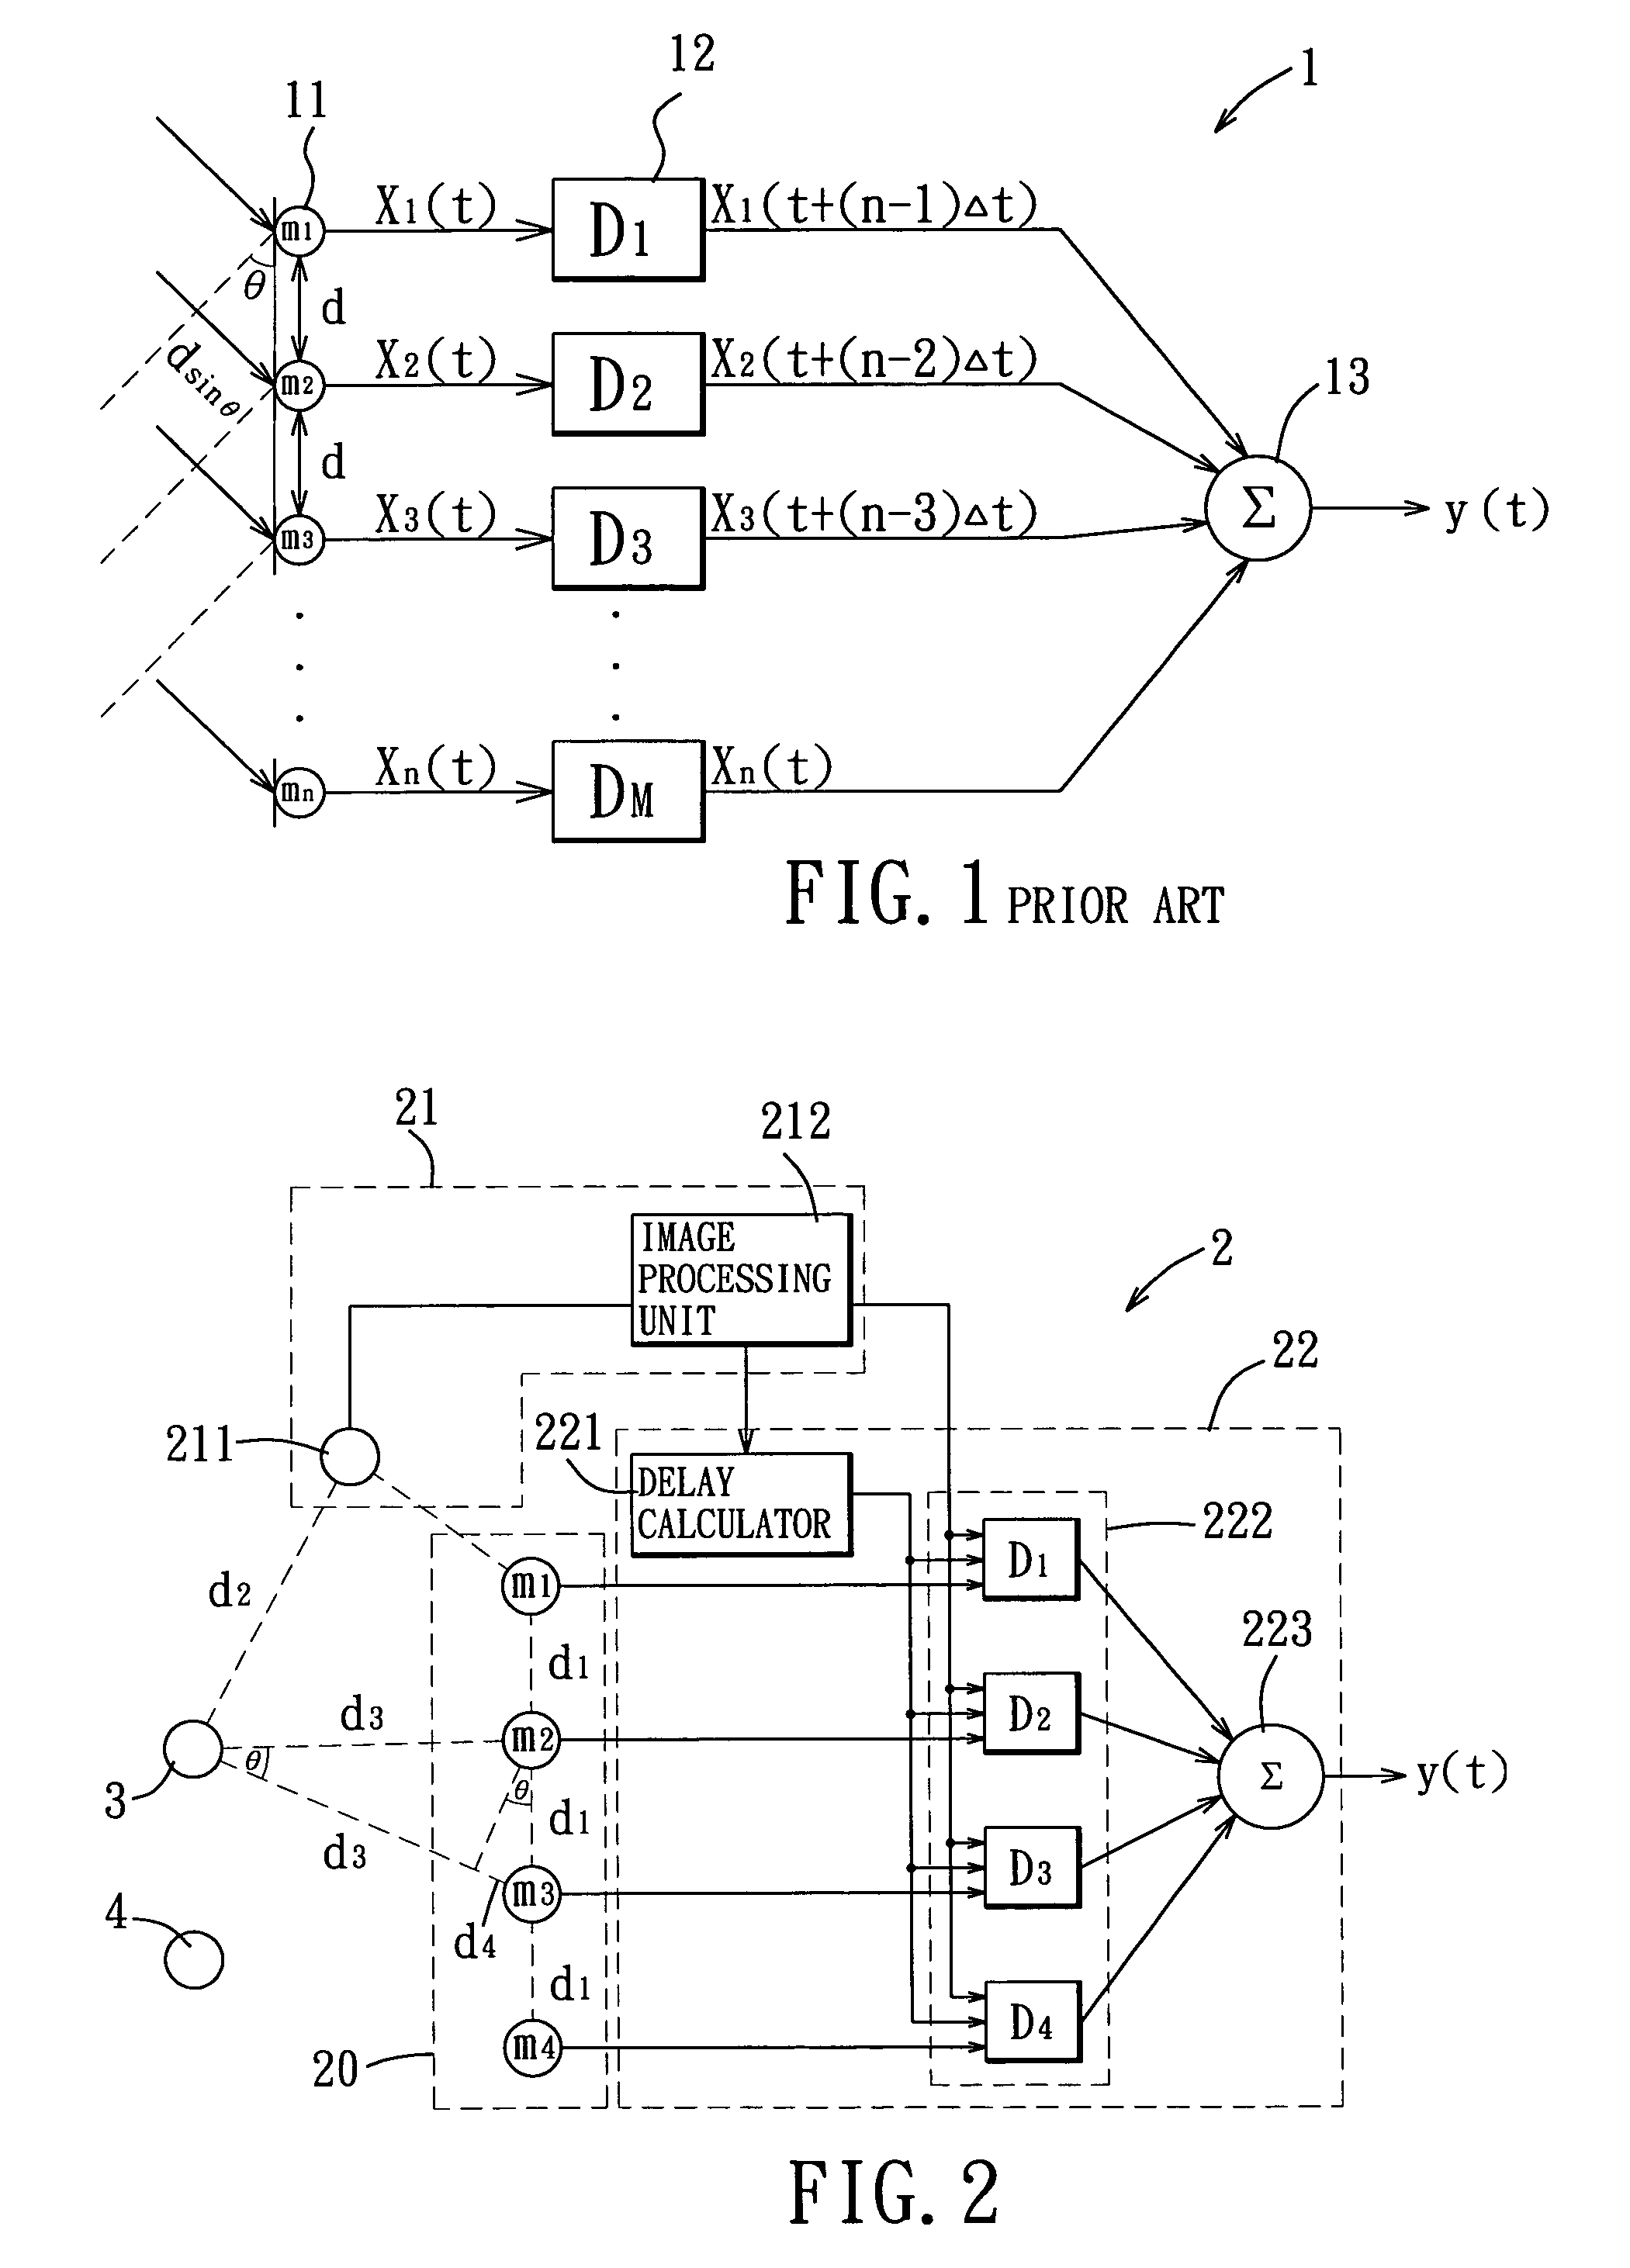 Sound pickup method and system with sound source tracking